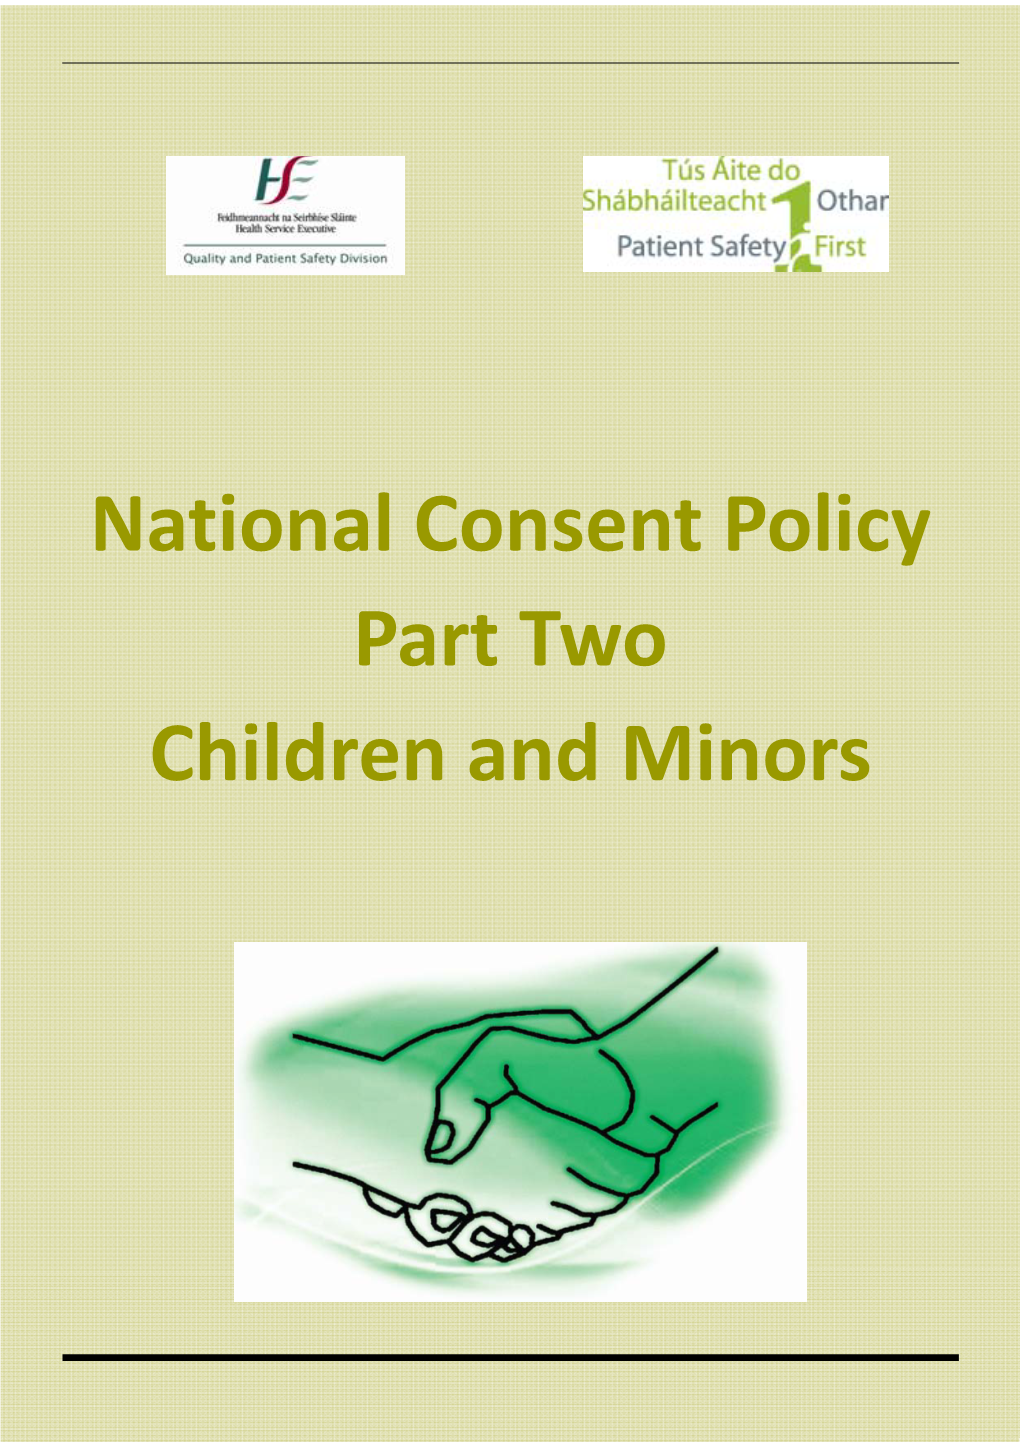 National Consent Policy Part Two Children and Minors